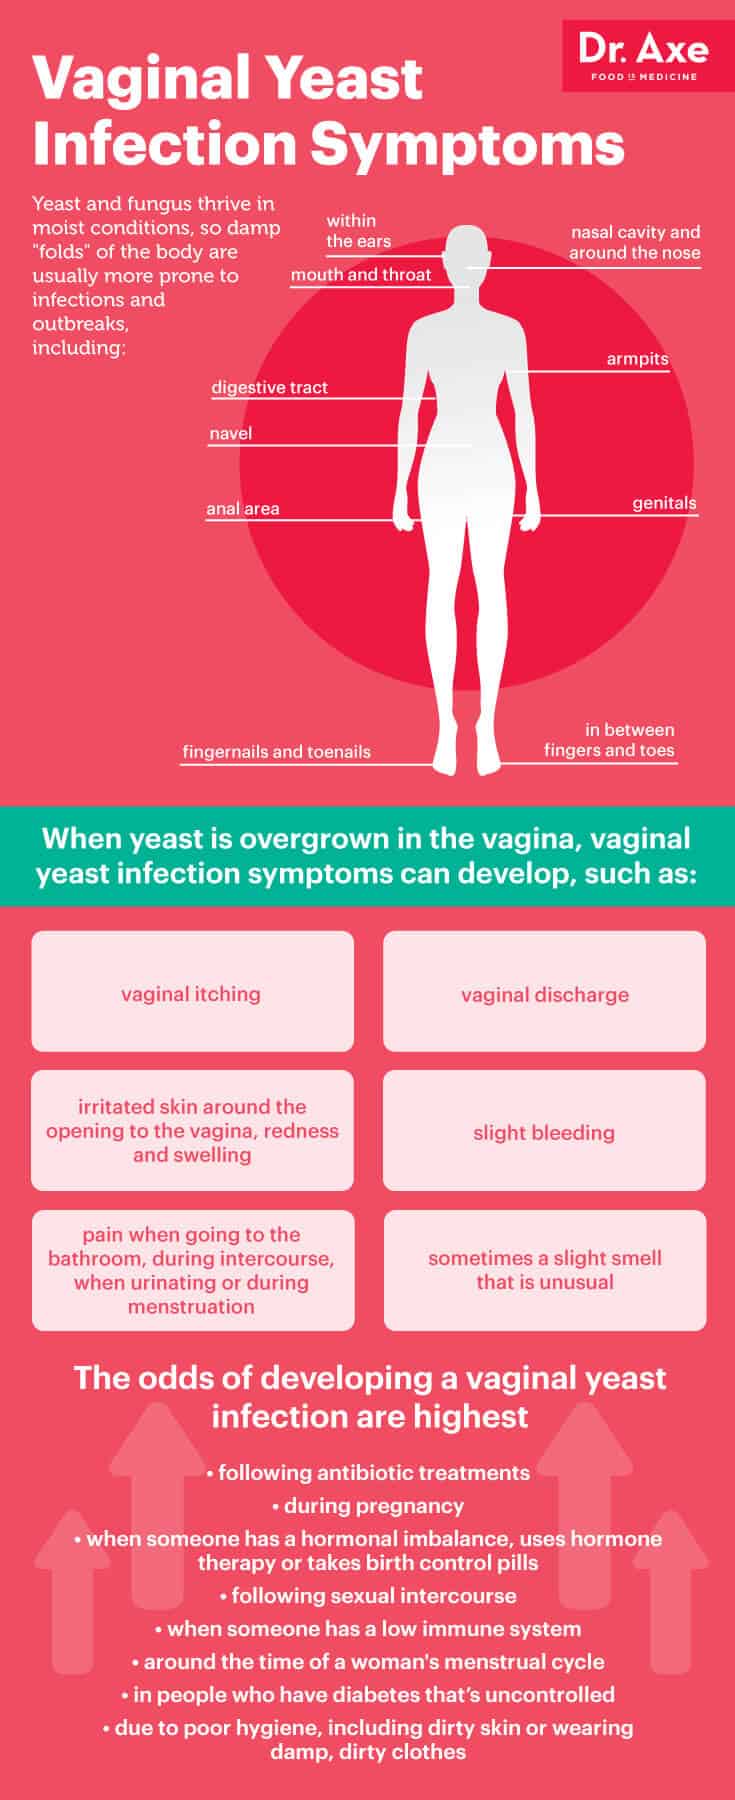 Vaginal Yeast Infection 6 Natural Ways To Get Rid Of It For Good Dr Axe 4376